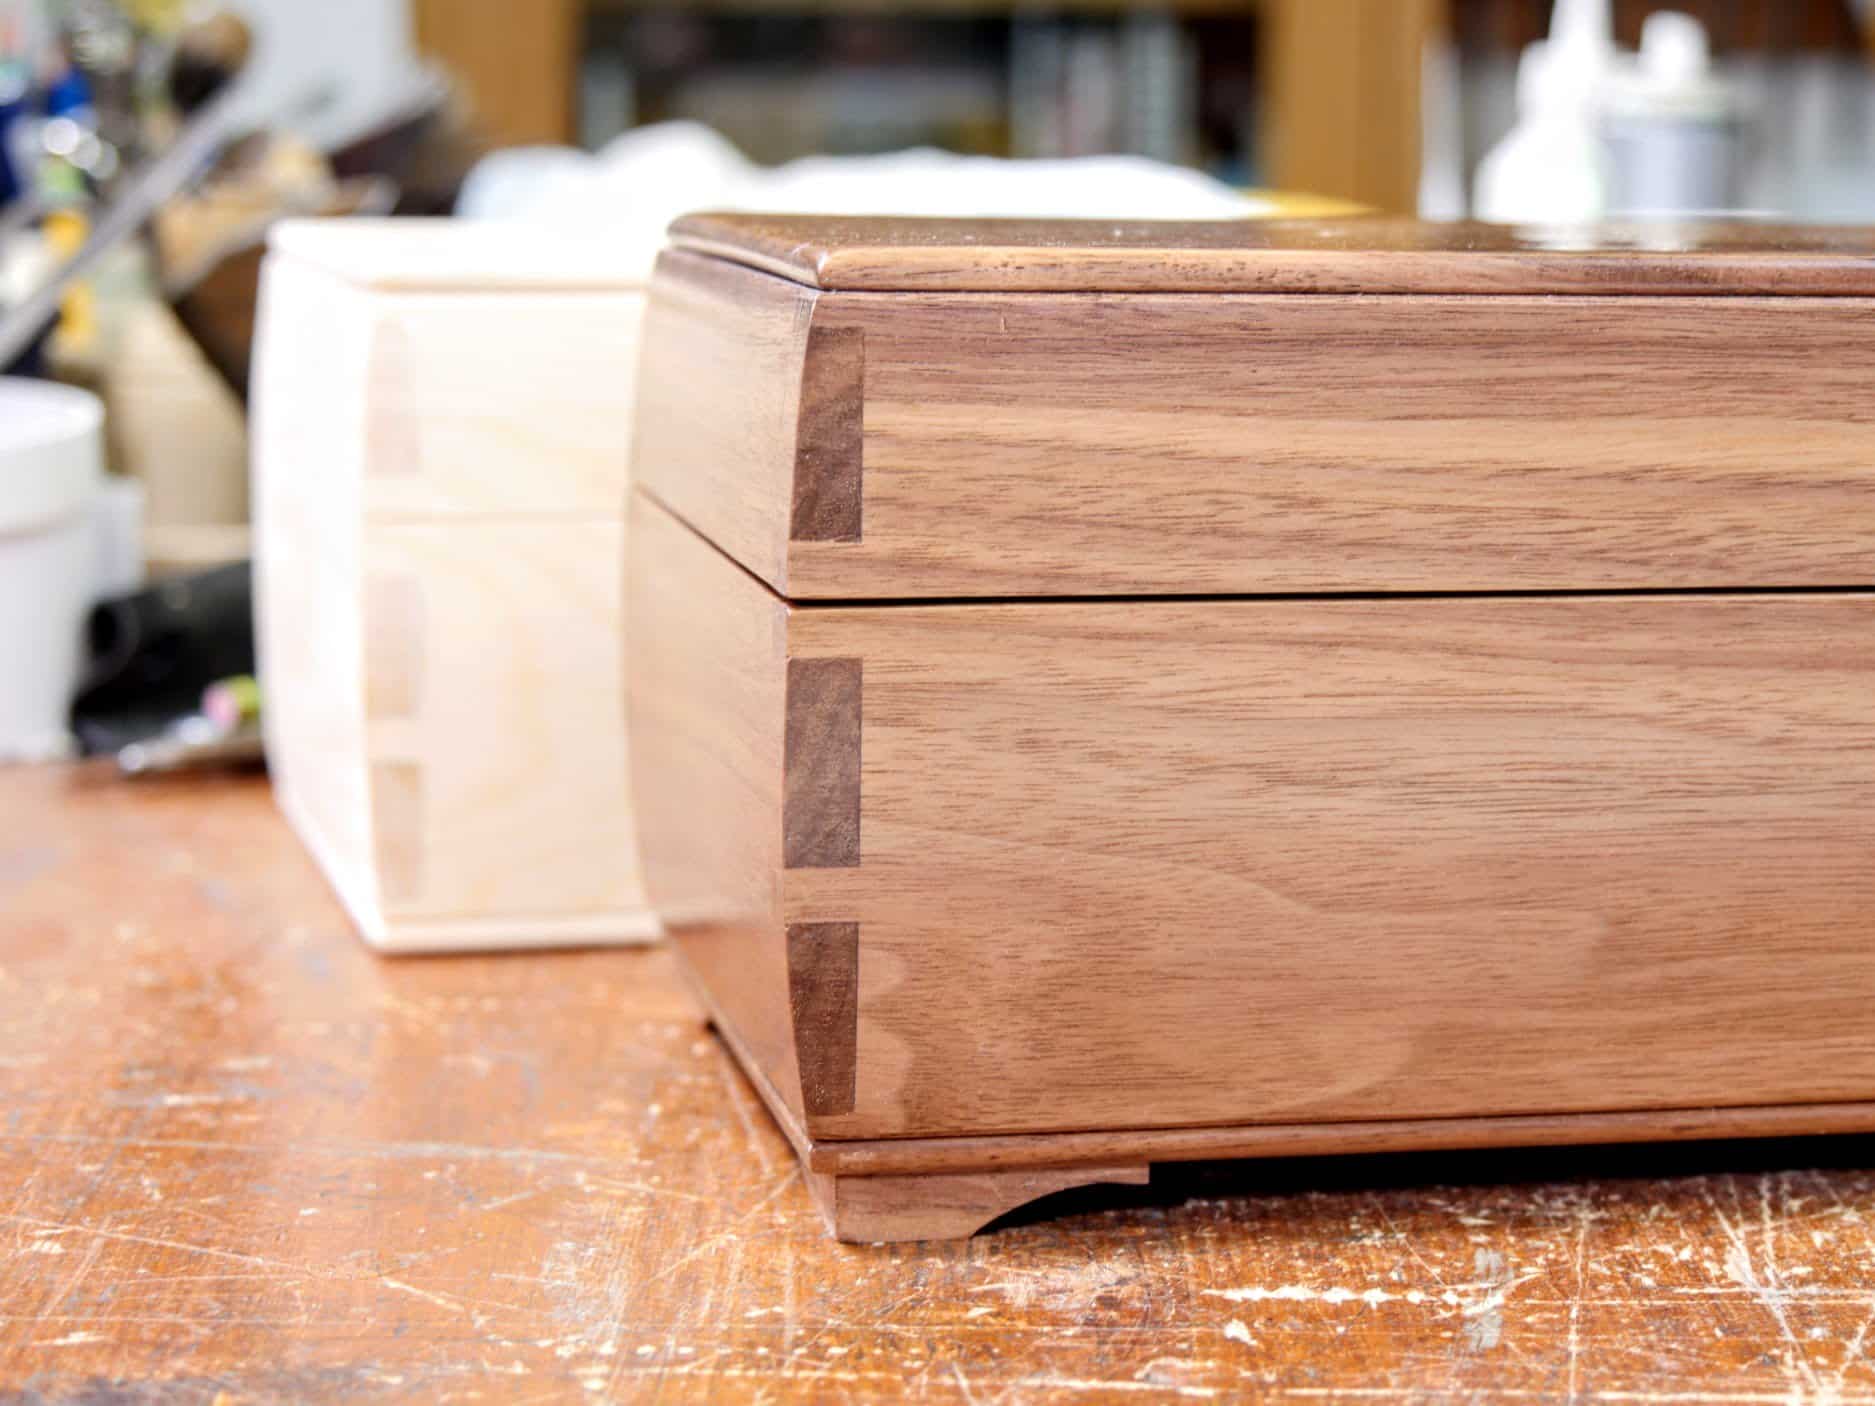 Hand Tool Tote with Hand Cut Dovetails